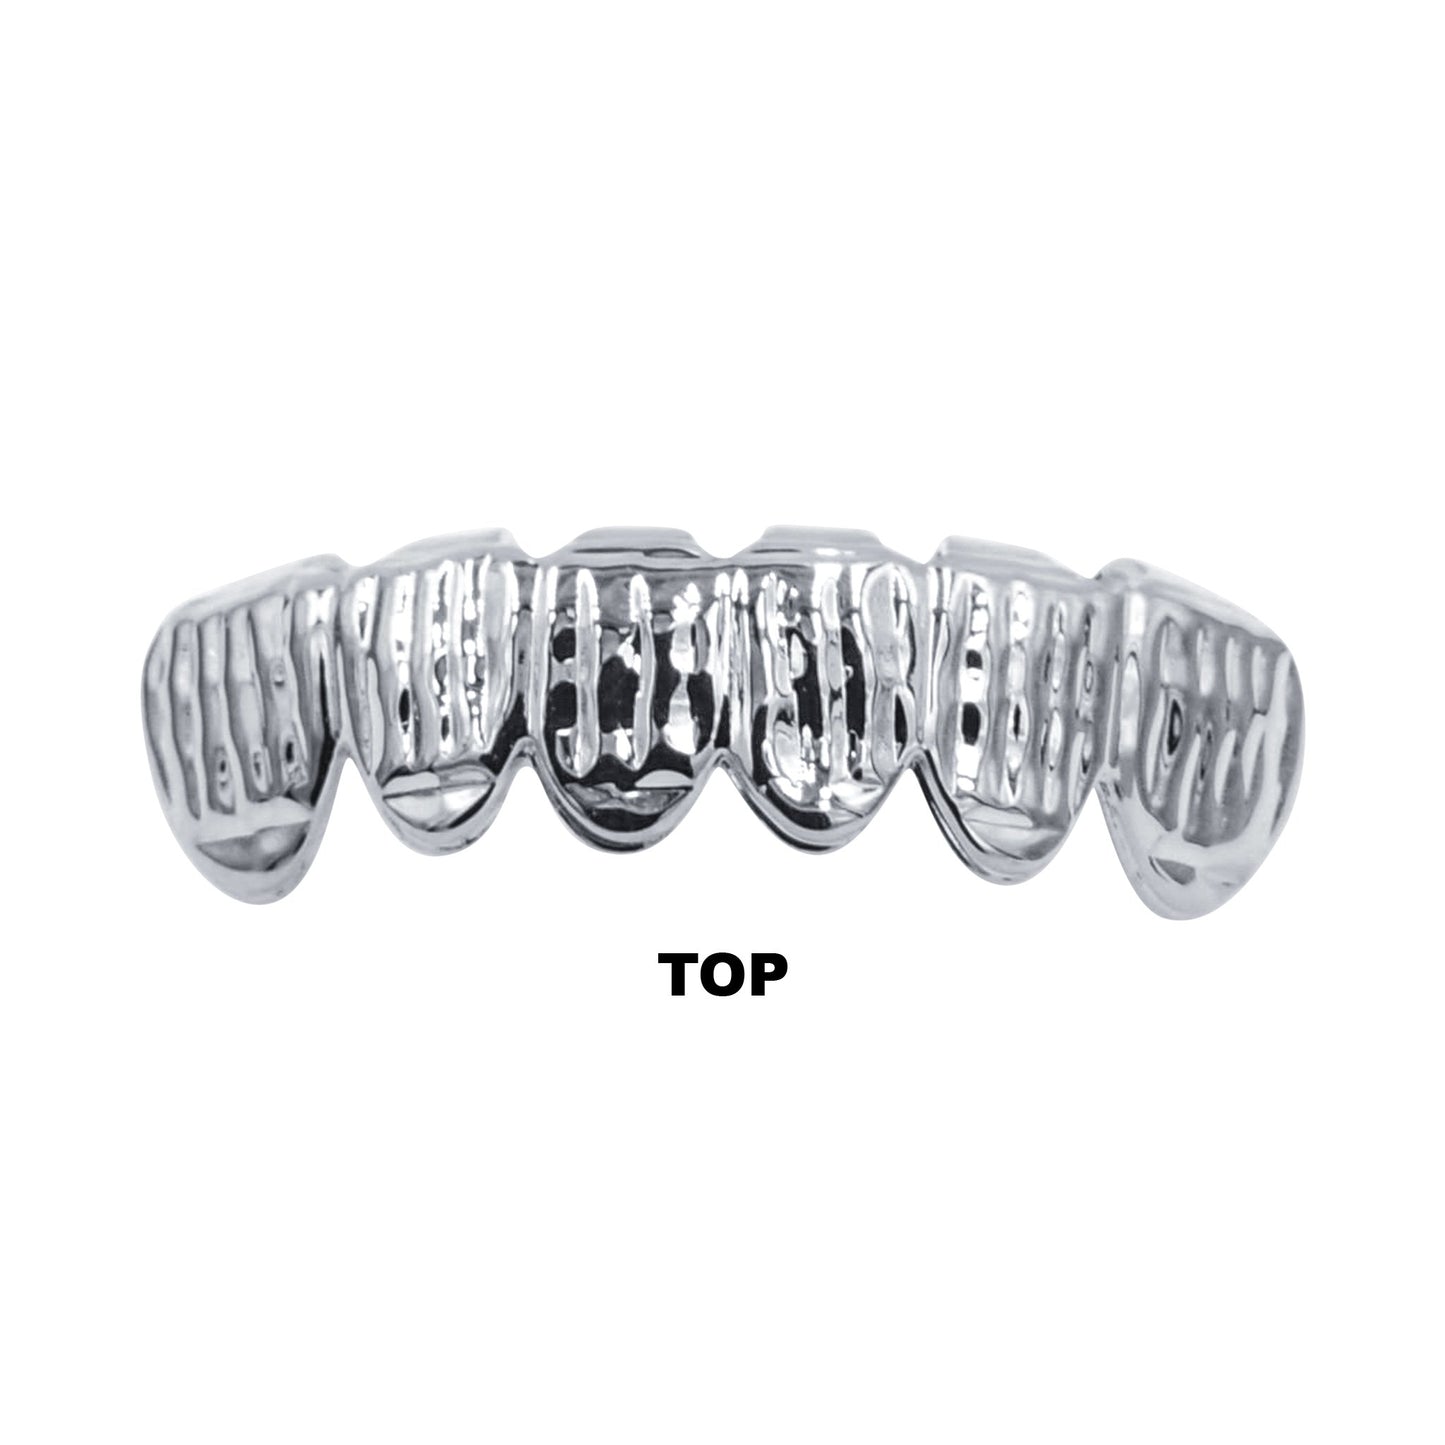 Solid Lustrous Grillz- HIP HOP GRILLZ IN SILVER COLOR I 913281 - ONEZINOTTA , jewelery that shines like gold...